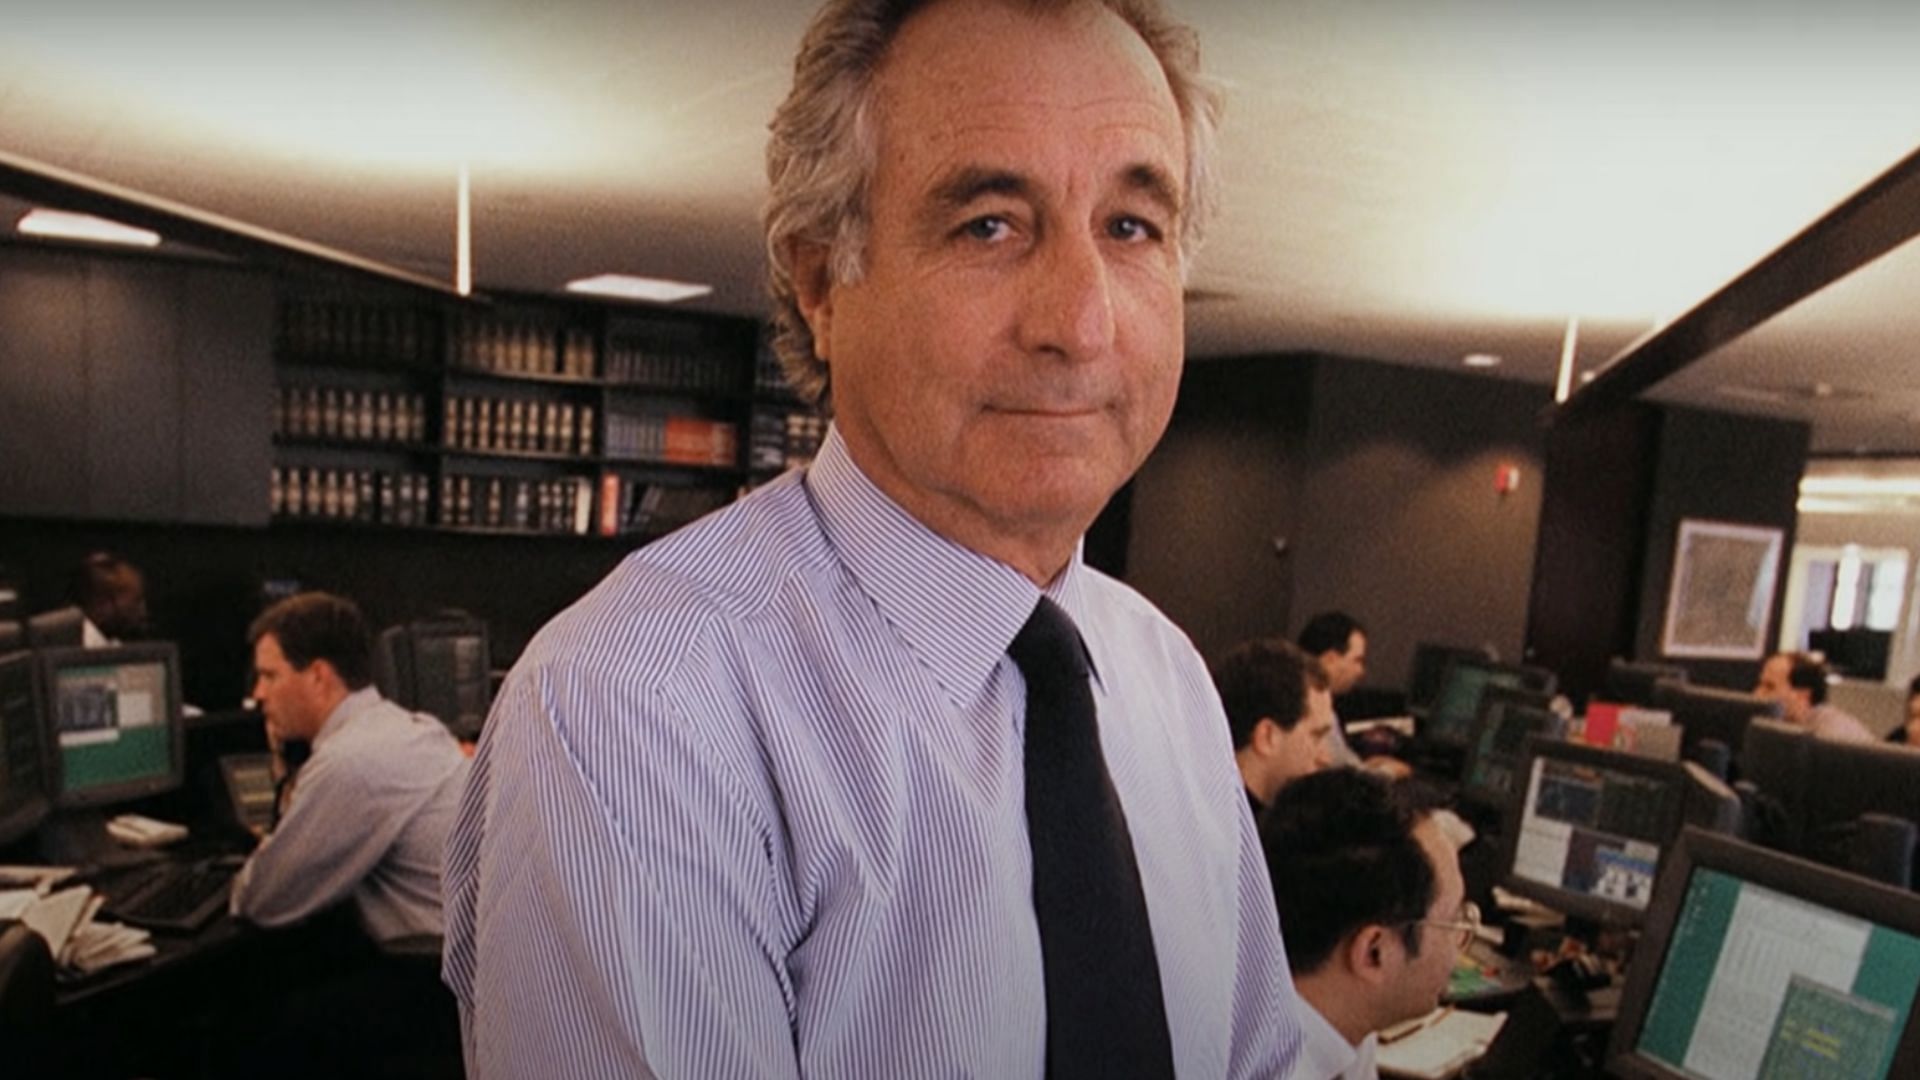 Madoff maintained that his children were unaware of the scheme throughout his life (Image via Frontline PBS).